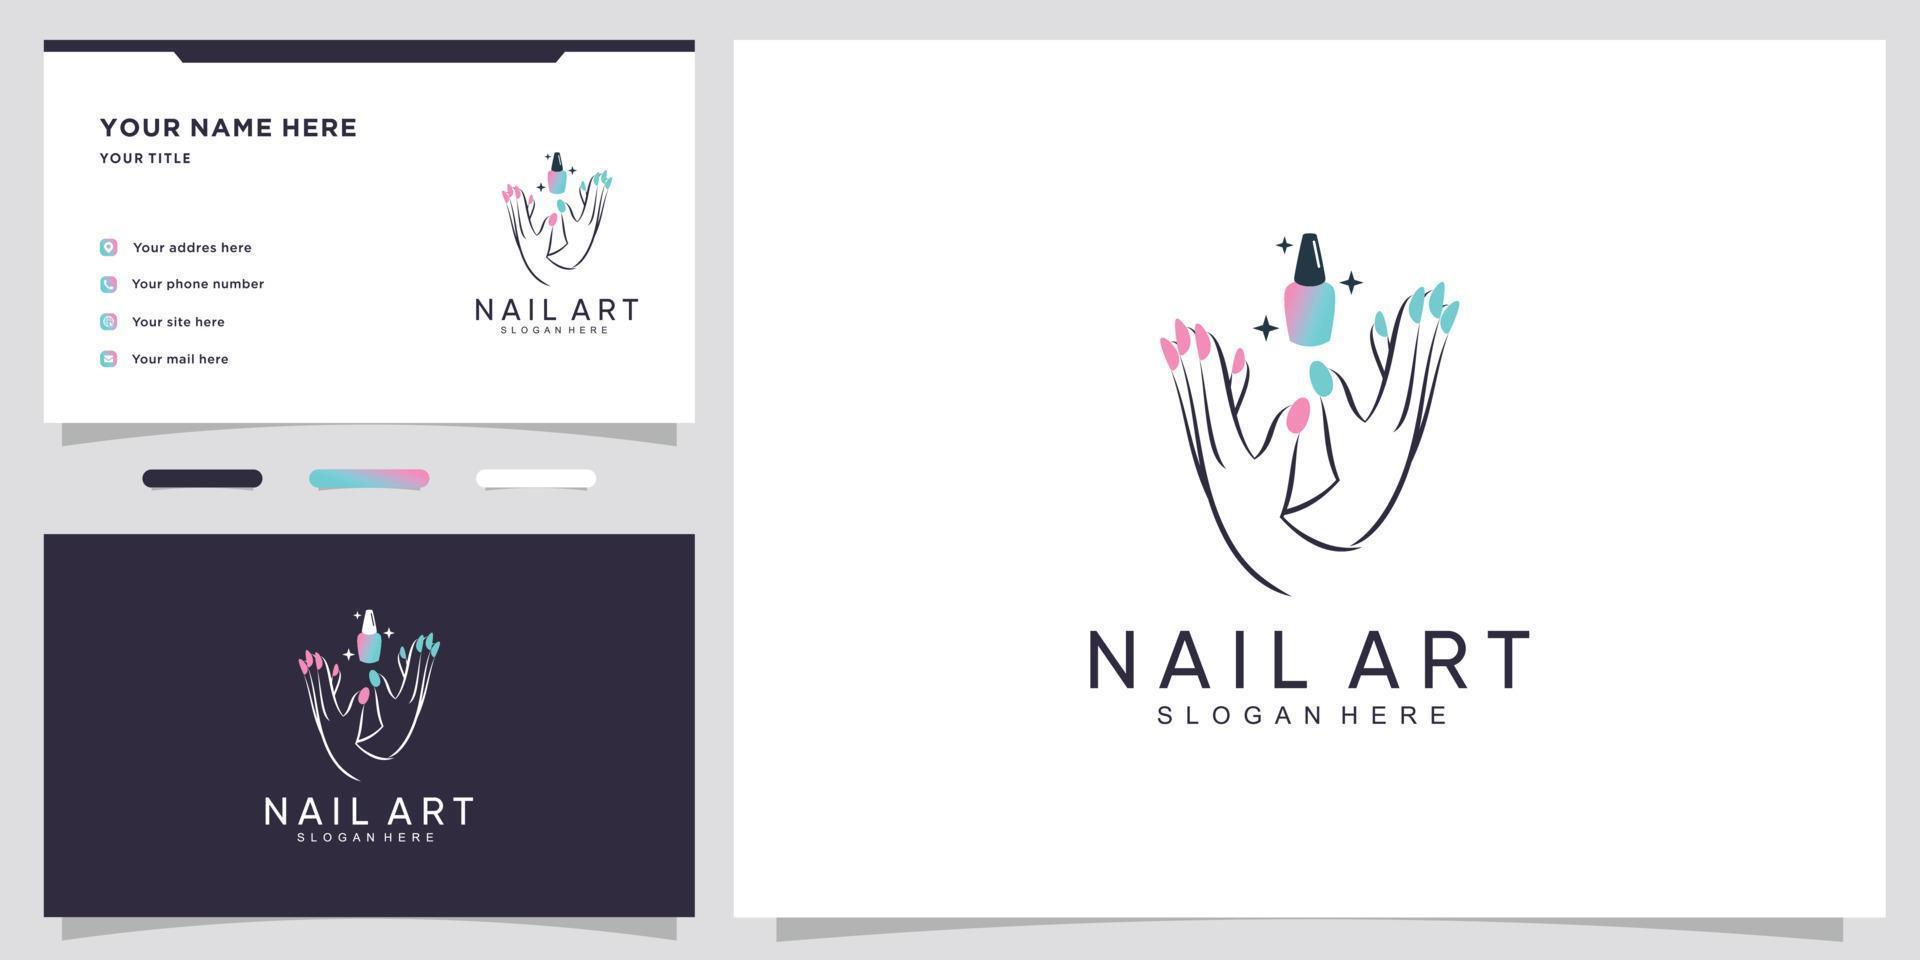 Nail polish or nail logo design with creative concept and business card design Premium Vector